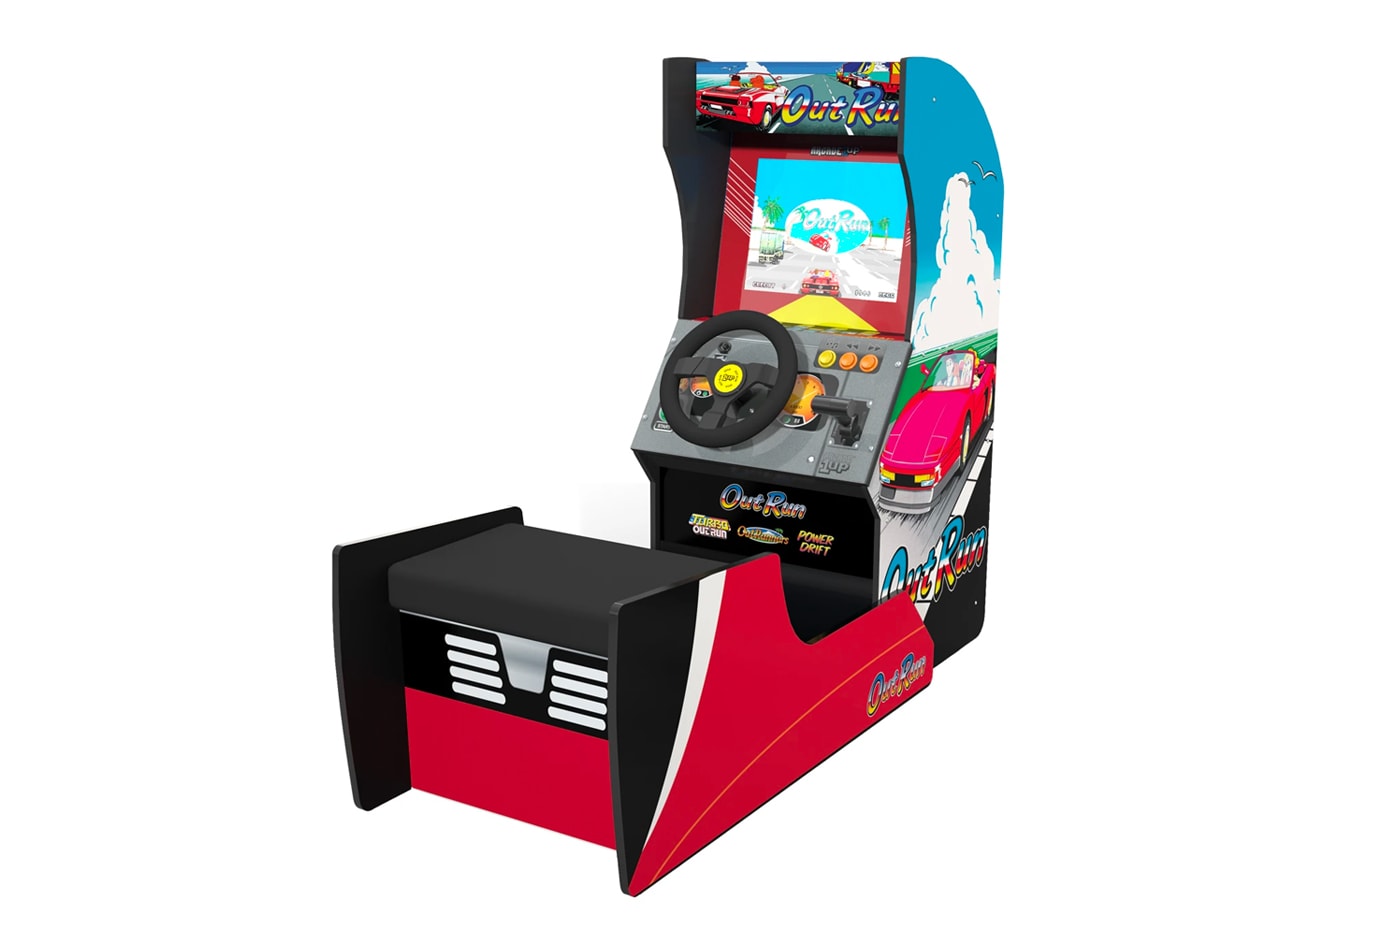 Arcade1Up Debuts First Driving Cabinet OutRun Turbo OutRun OutRunners Power Drift games titles sega nostaglic retro vintage gaming